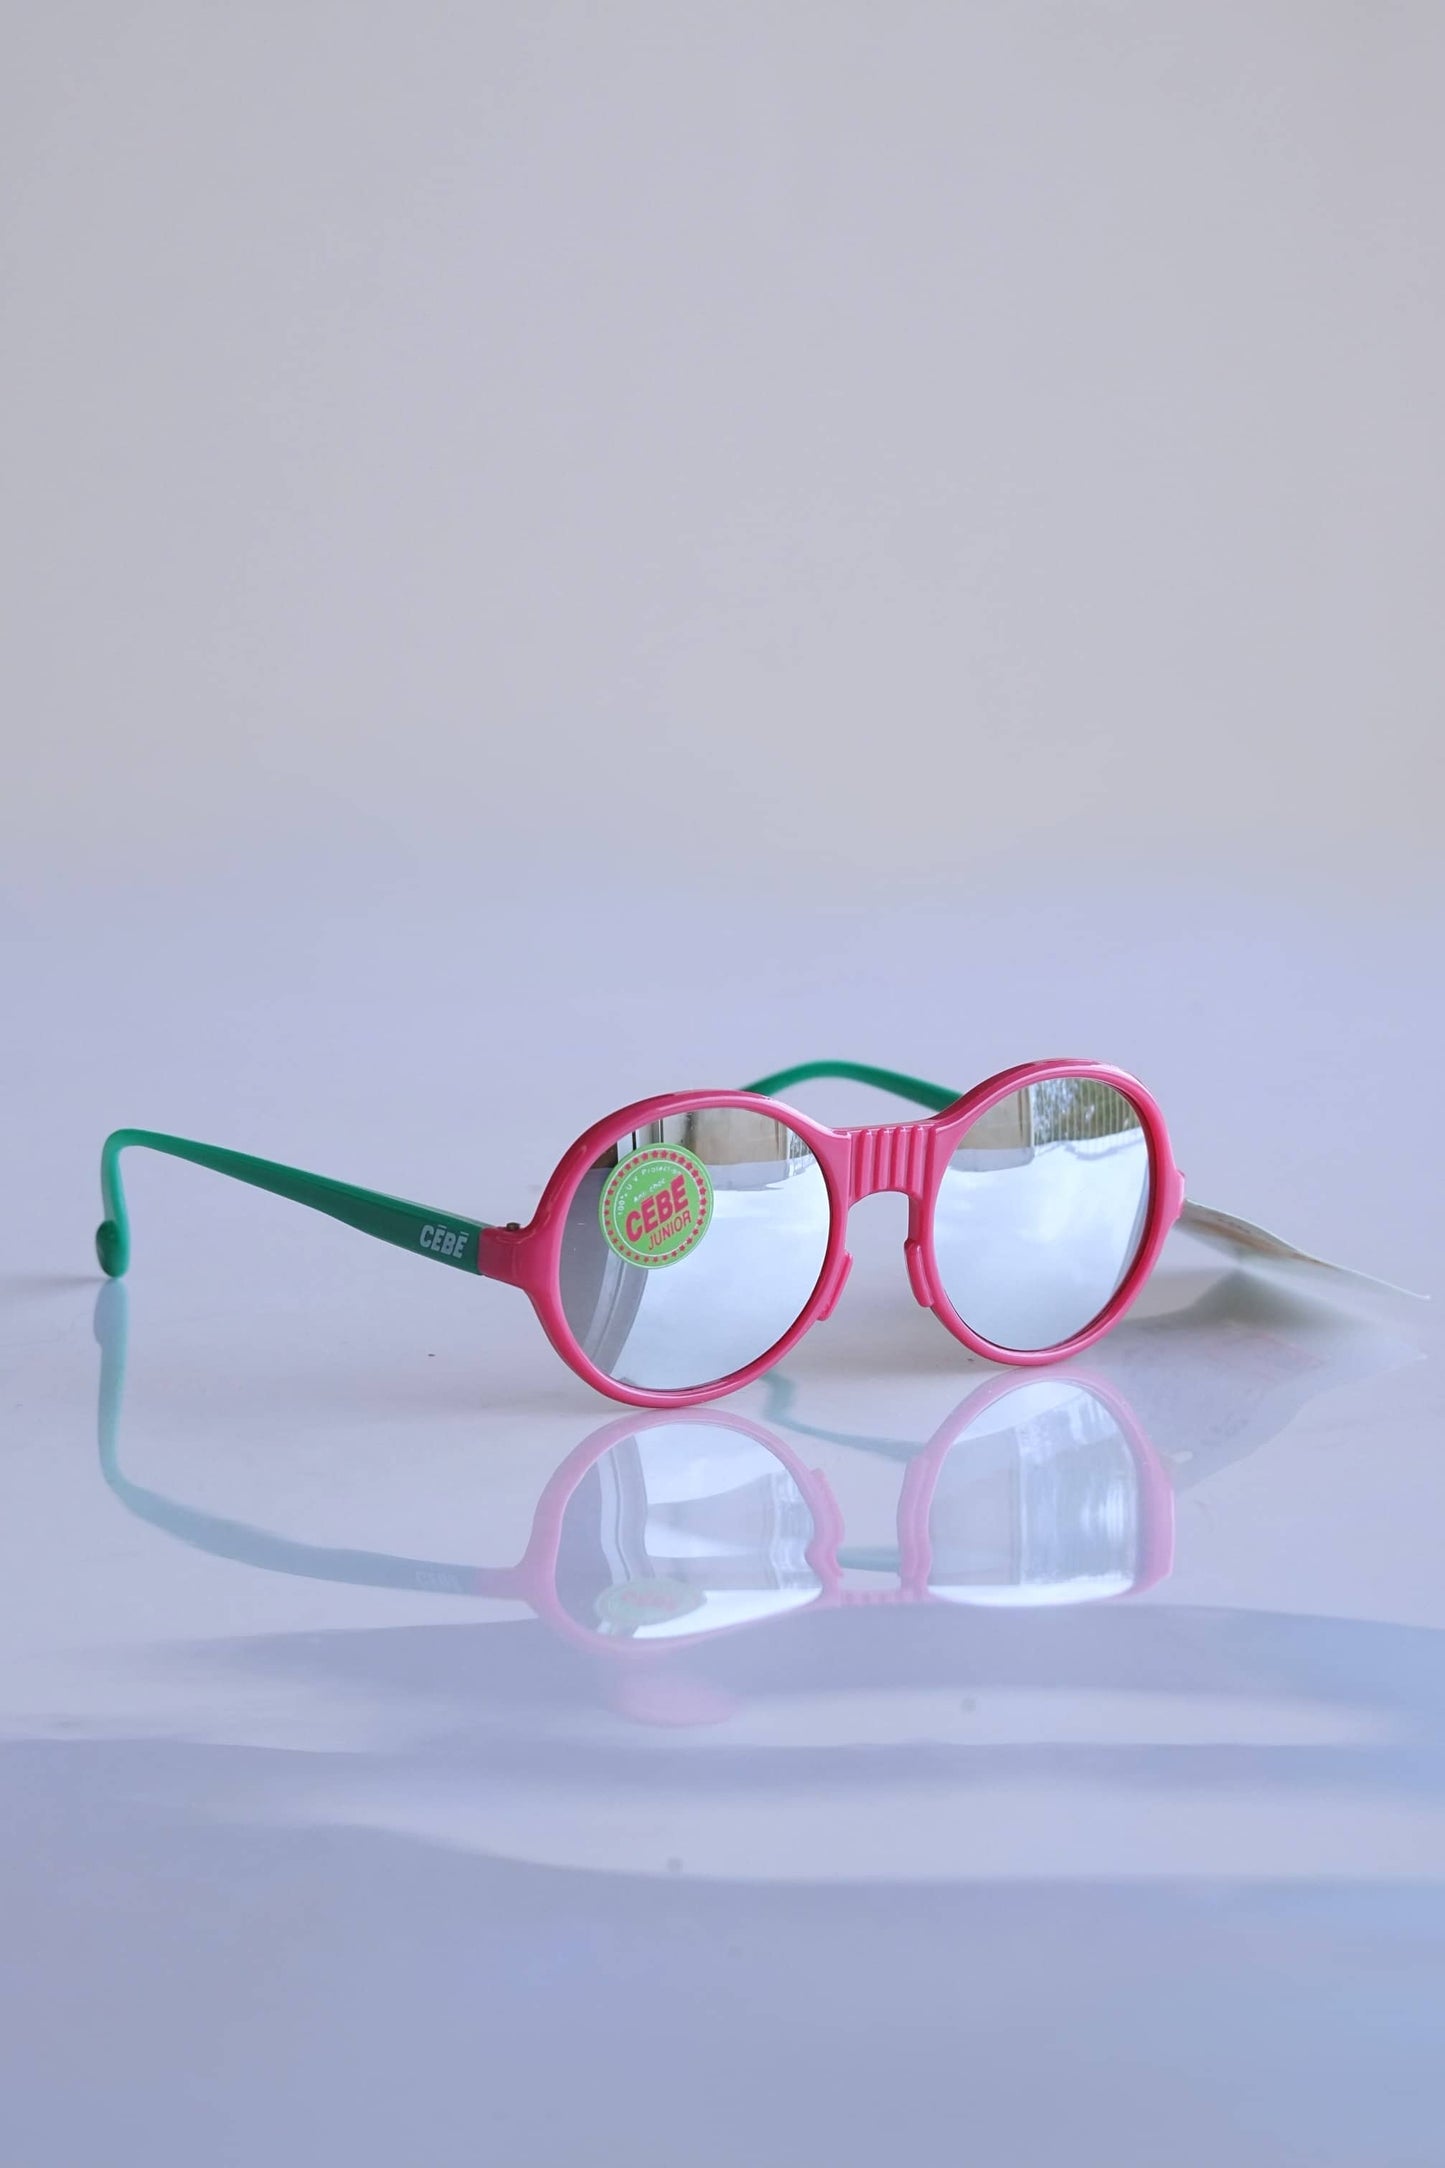 CÉBÉ Baby Glasses in pink and green and mirror lenses